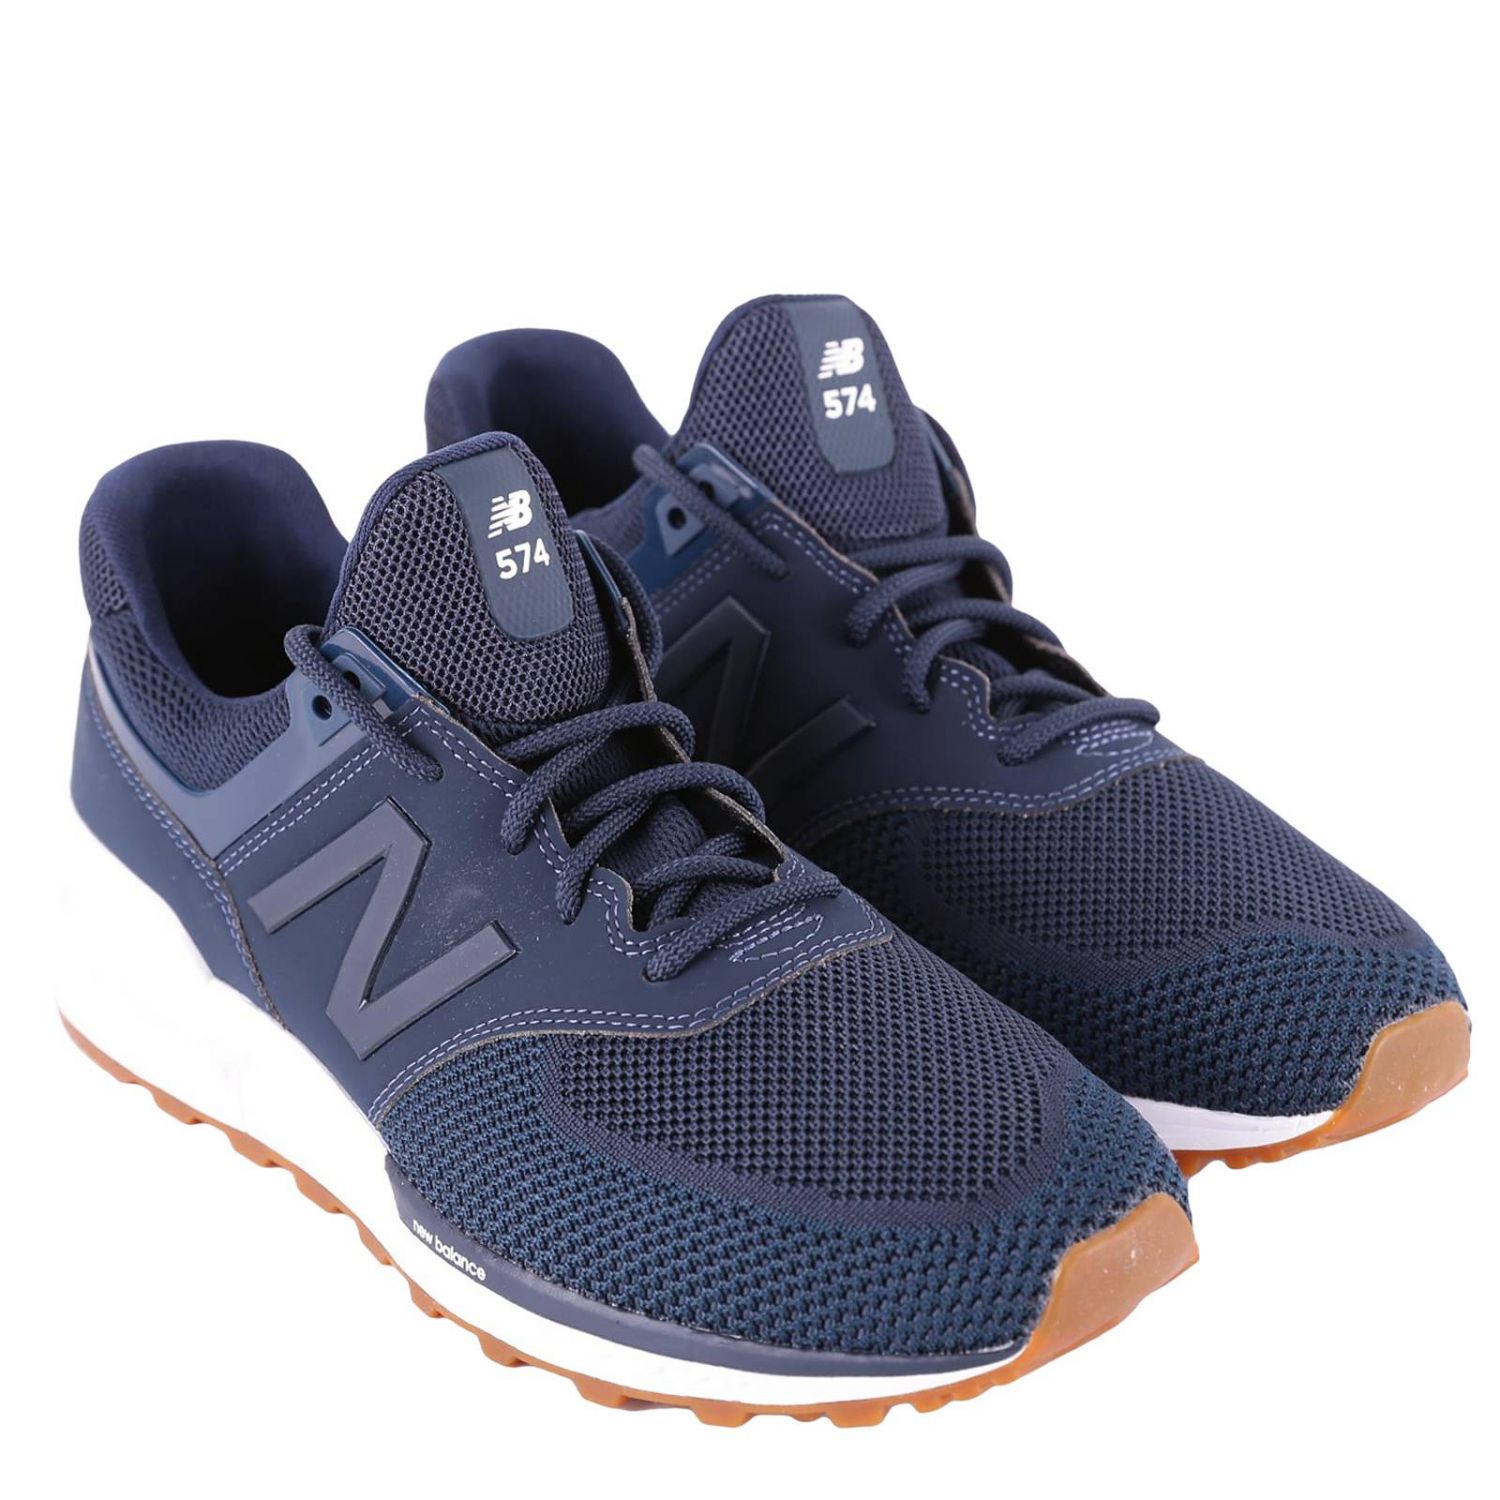 New Balance Outlet: Sneakers men | Sneakers New Balance Men Blue